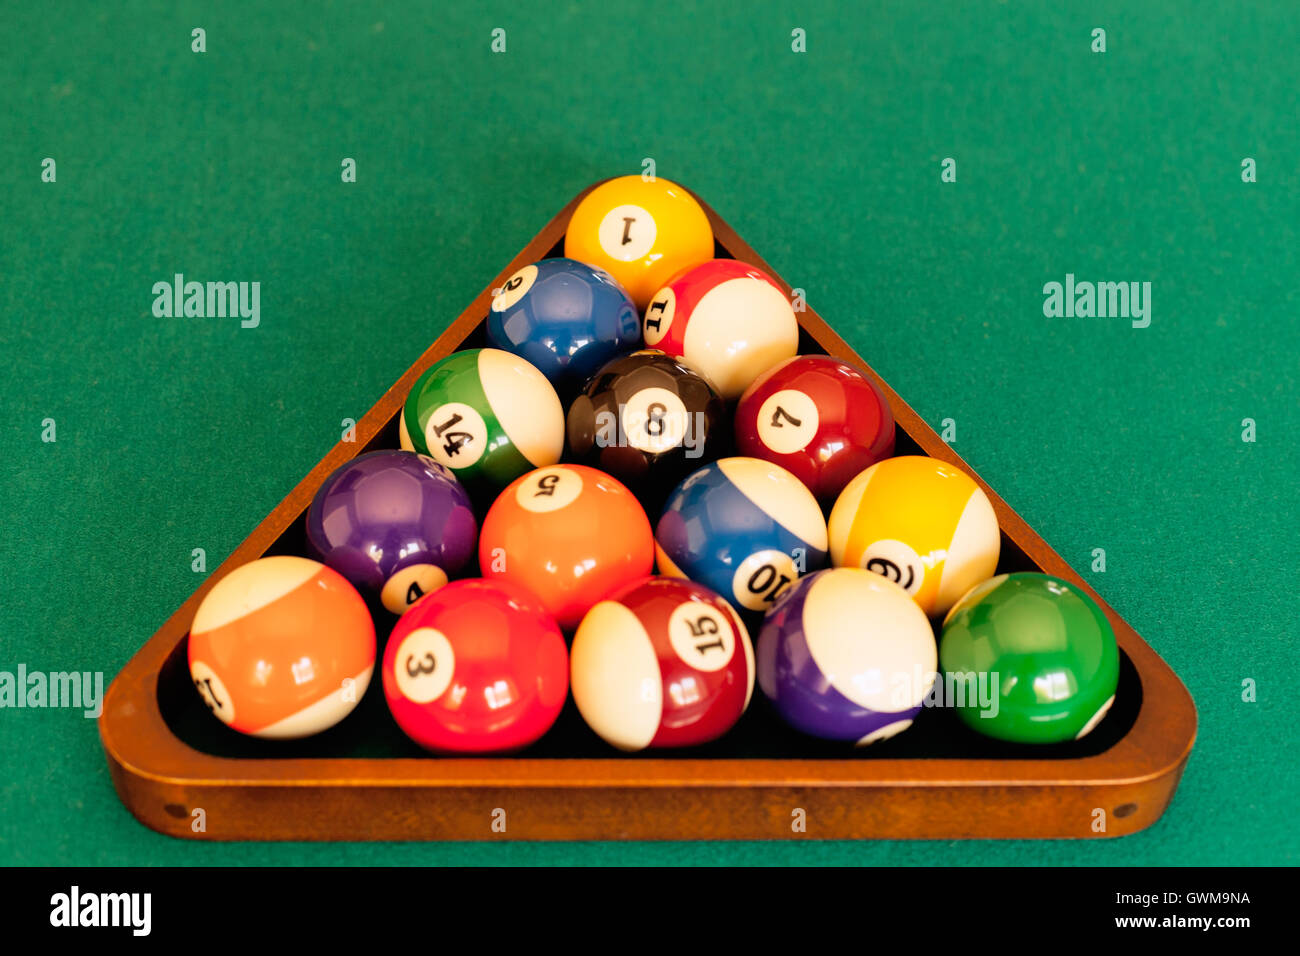 Pool balls ordered in a rack ready for a game of eight-ball pool Stock Photo